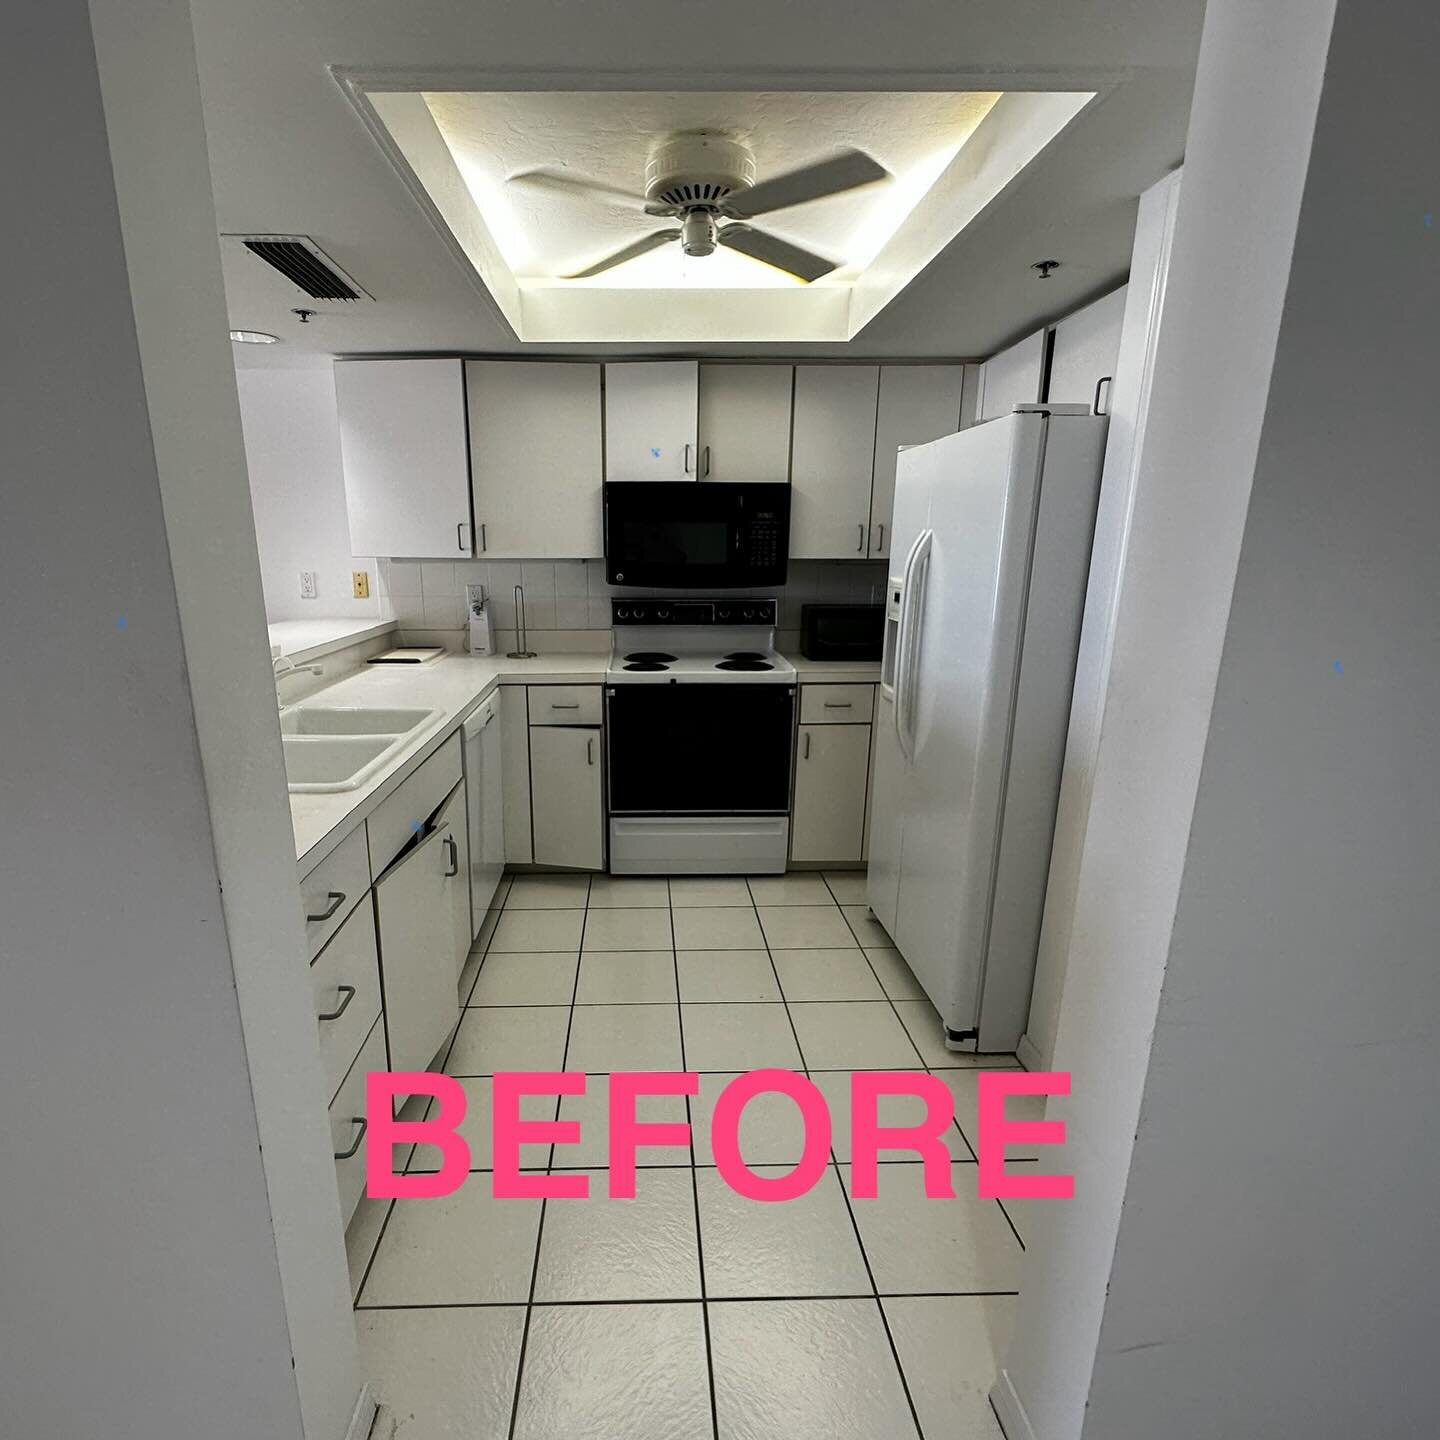 Fresh take on a kitchen remodel 🛠️

Call or text us today!

239-235-1818